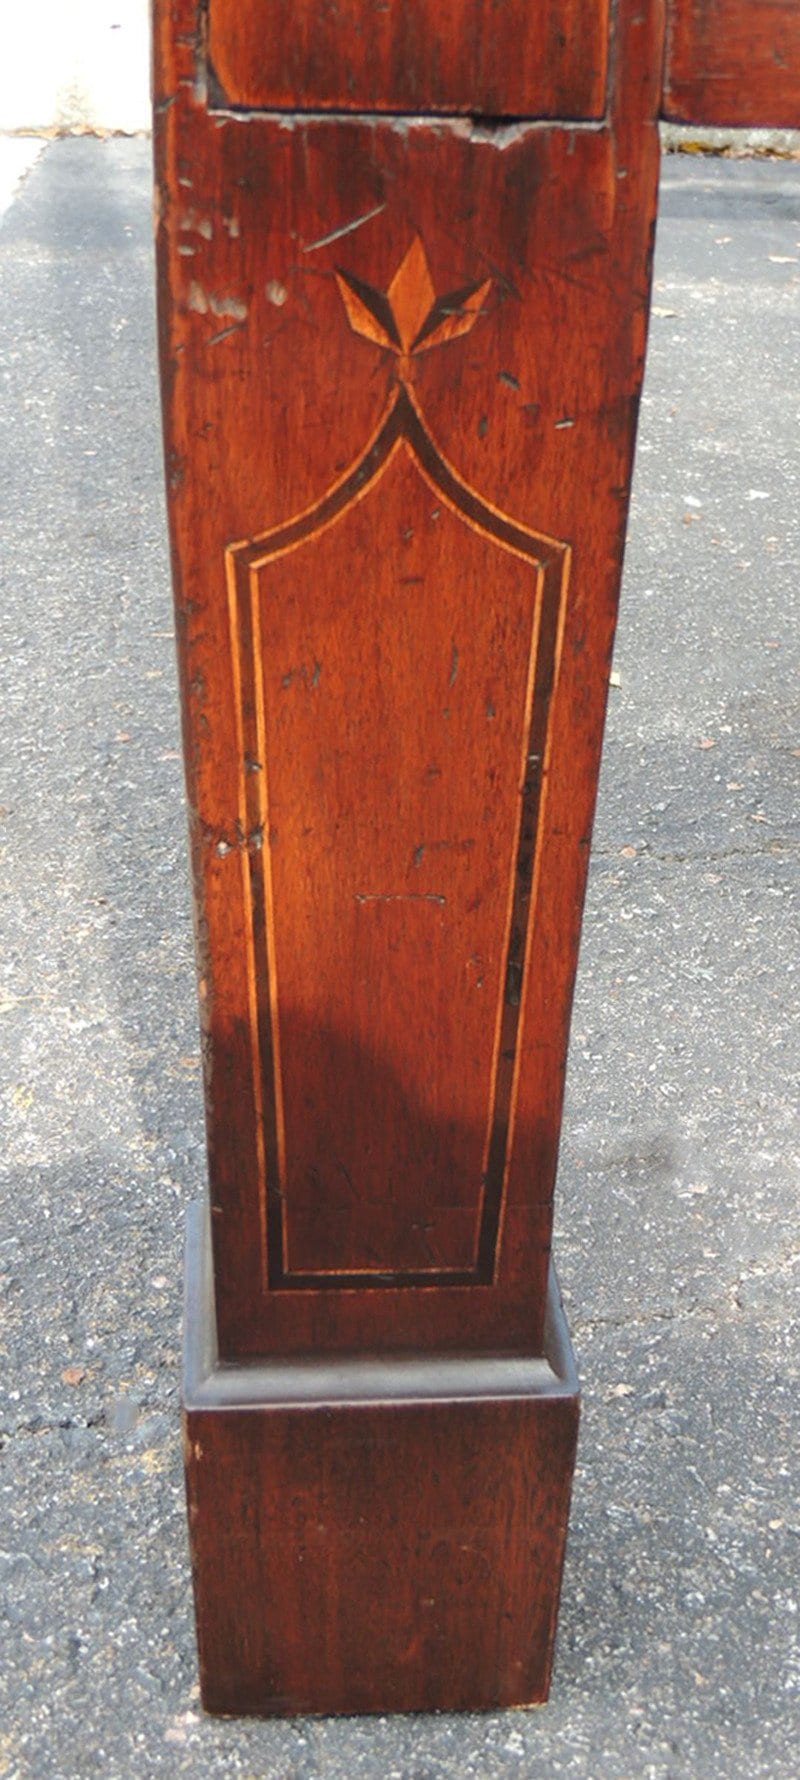 Early 19th Century Charleston Mahogany Four-Poster Bed with Tester